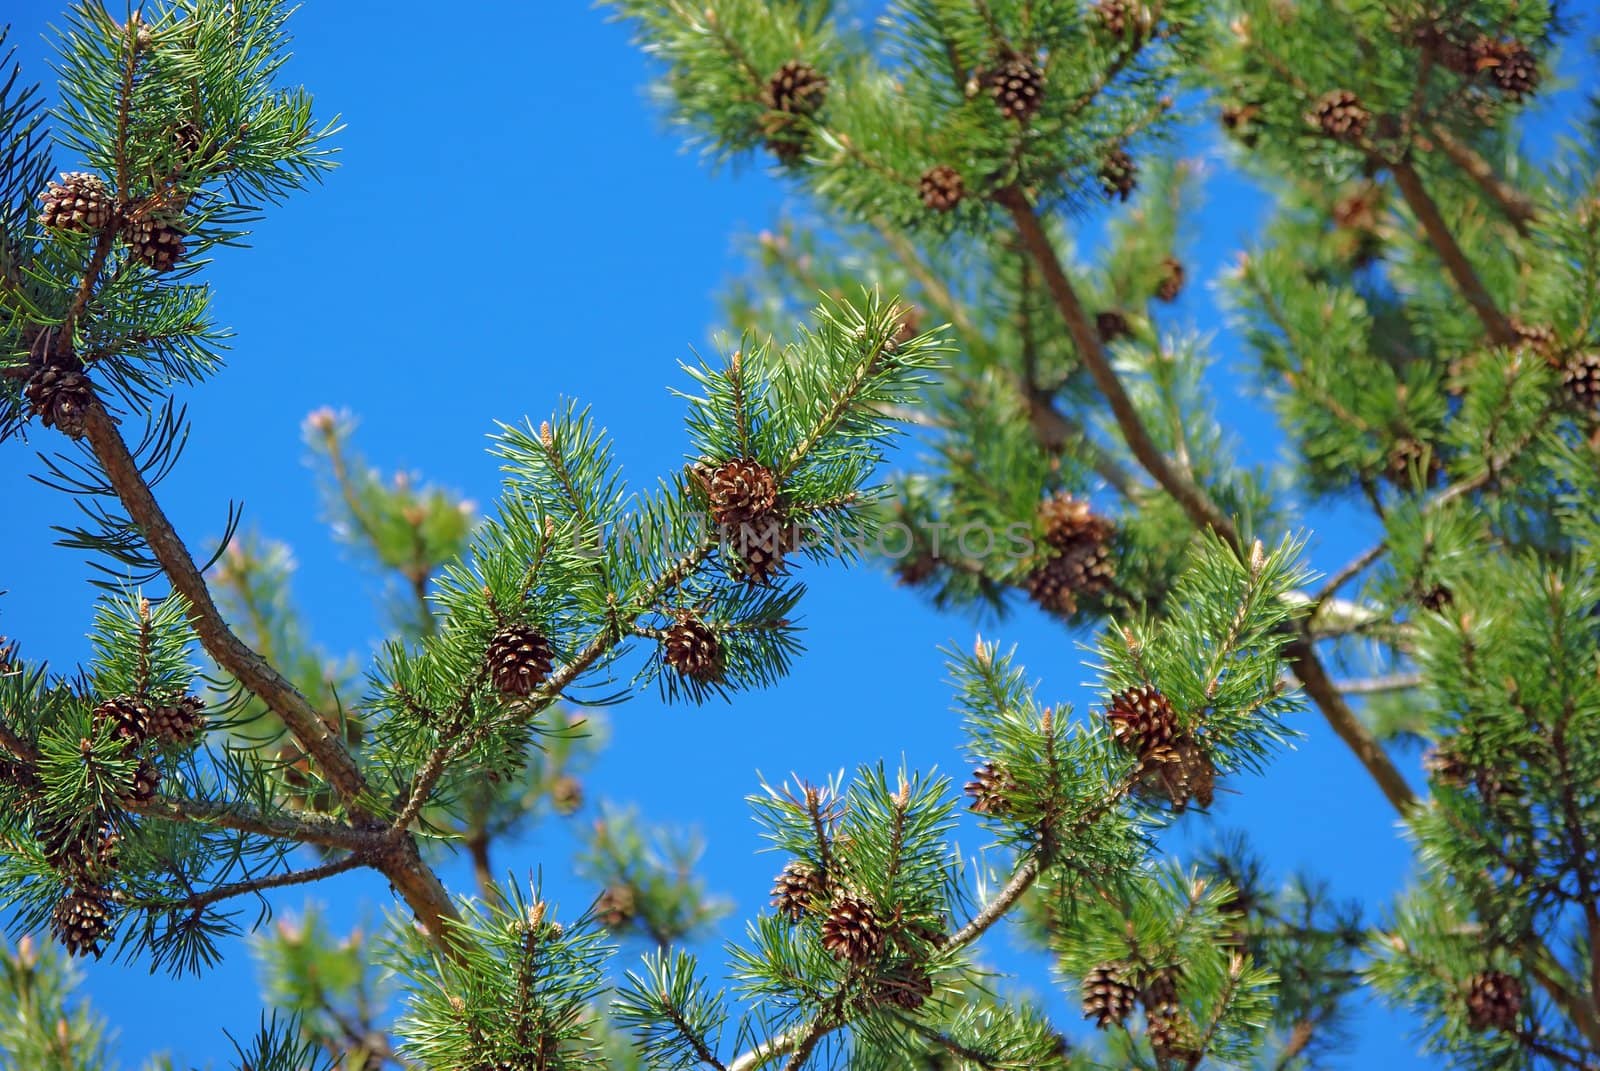 Pinetree branches and cones against blue sky background